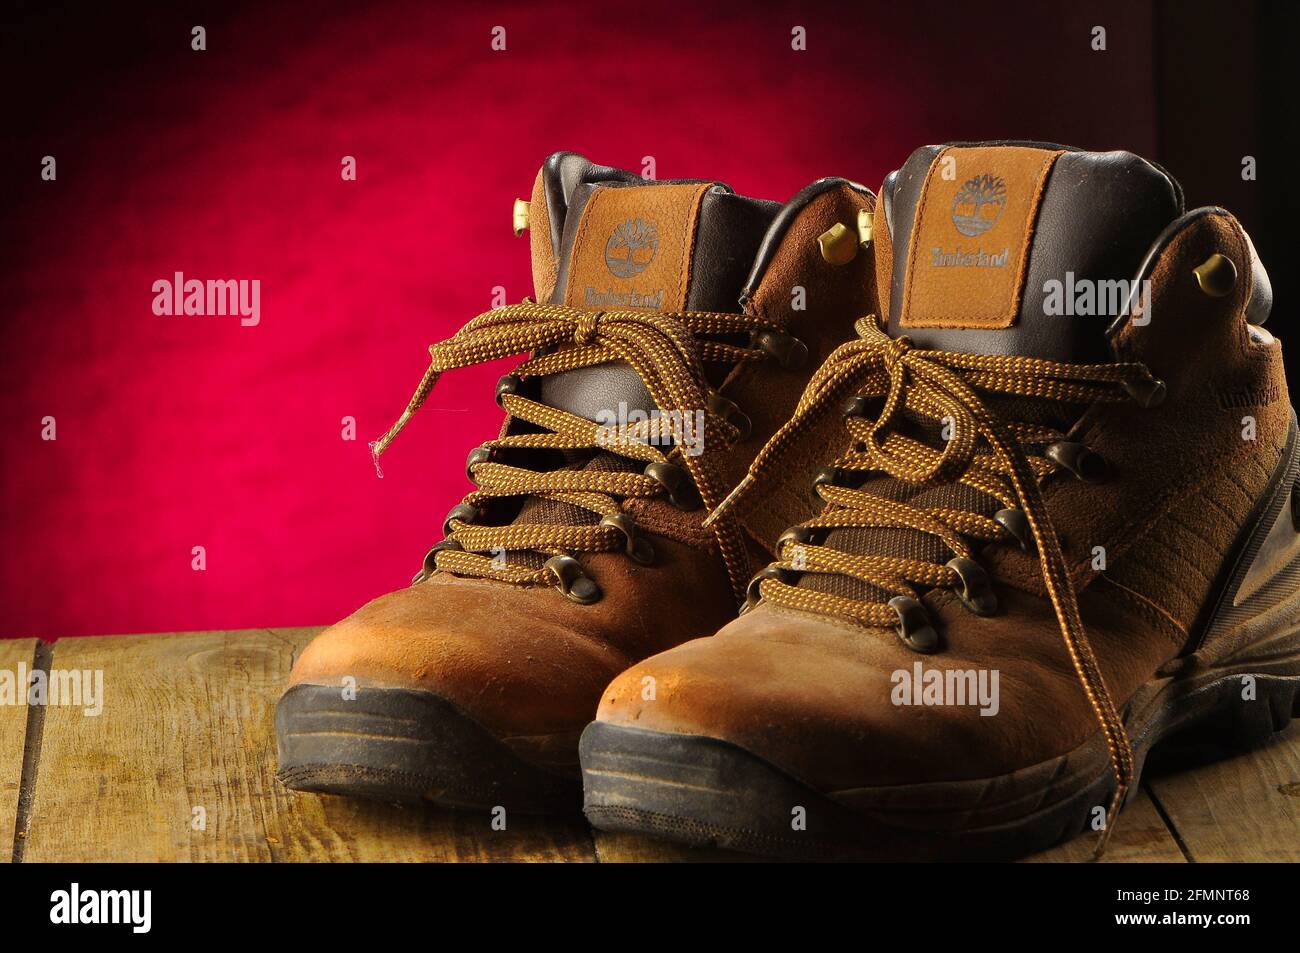 Timberland Shoes High Resolution Stock Photography and Images - Alamy